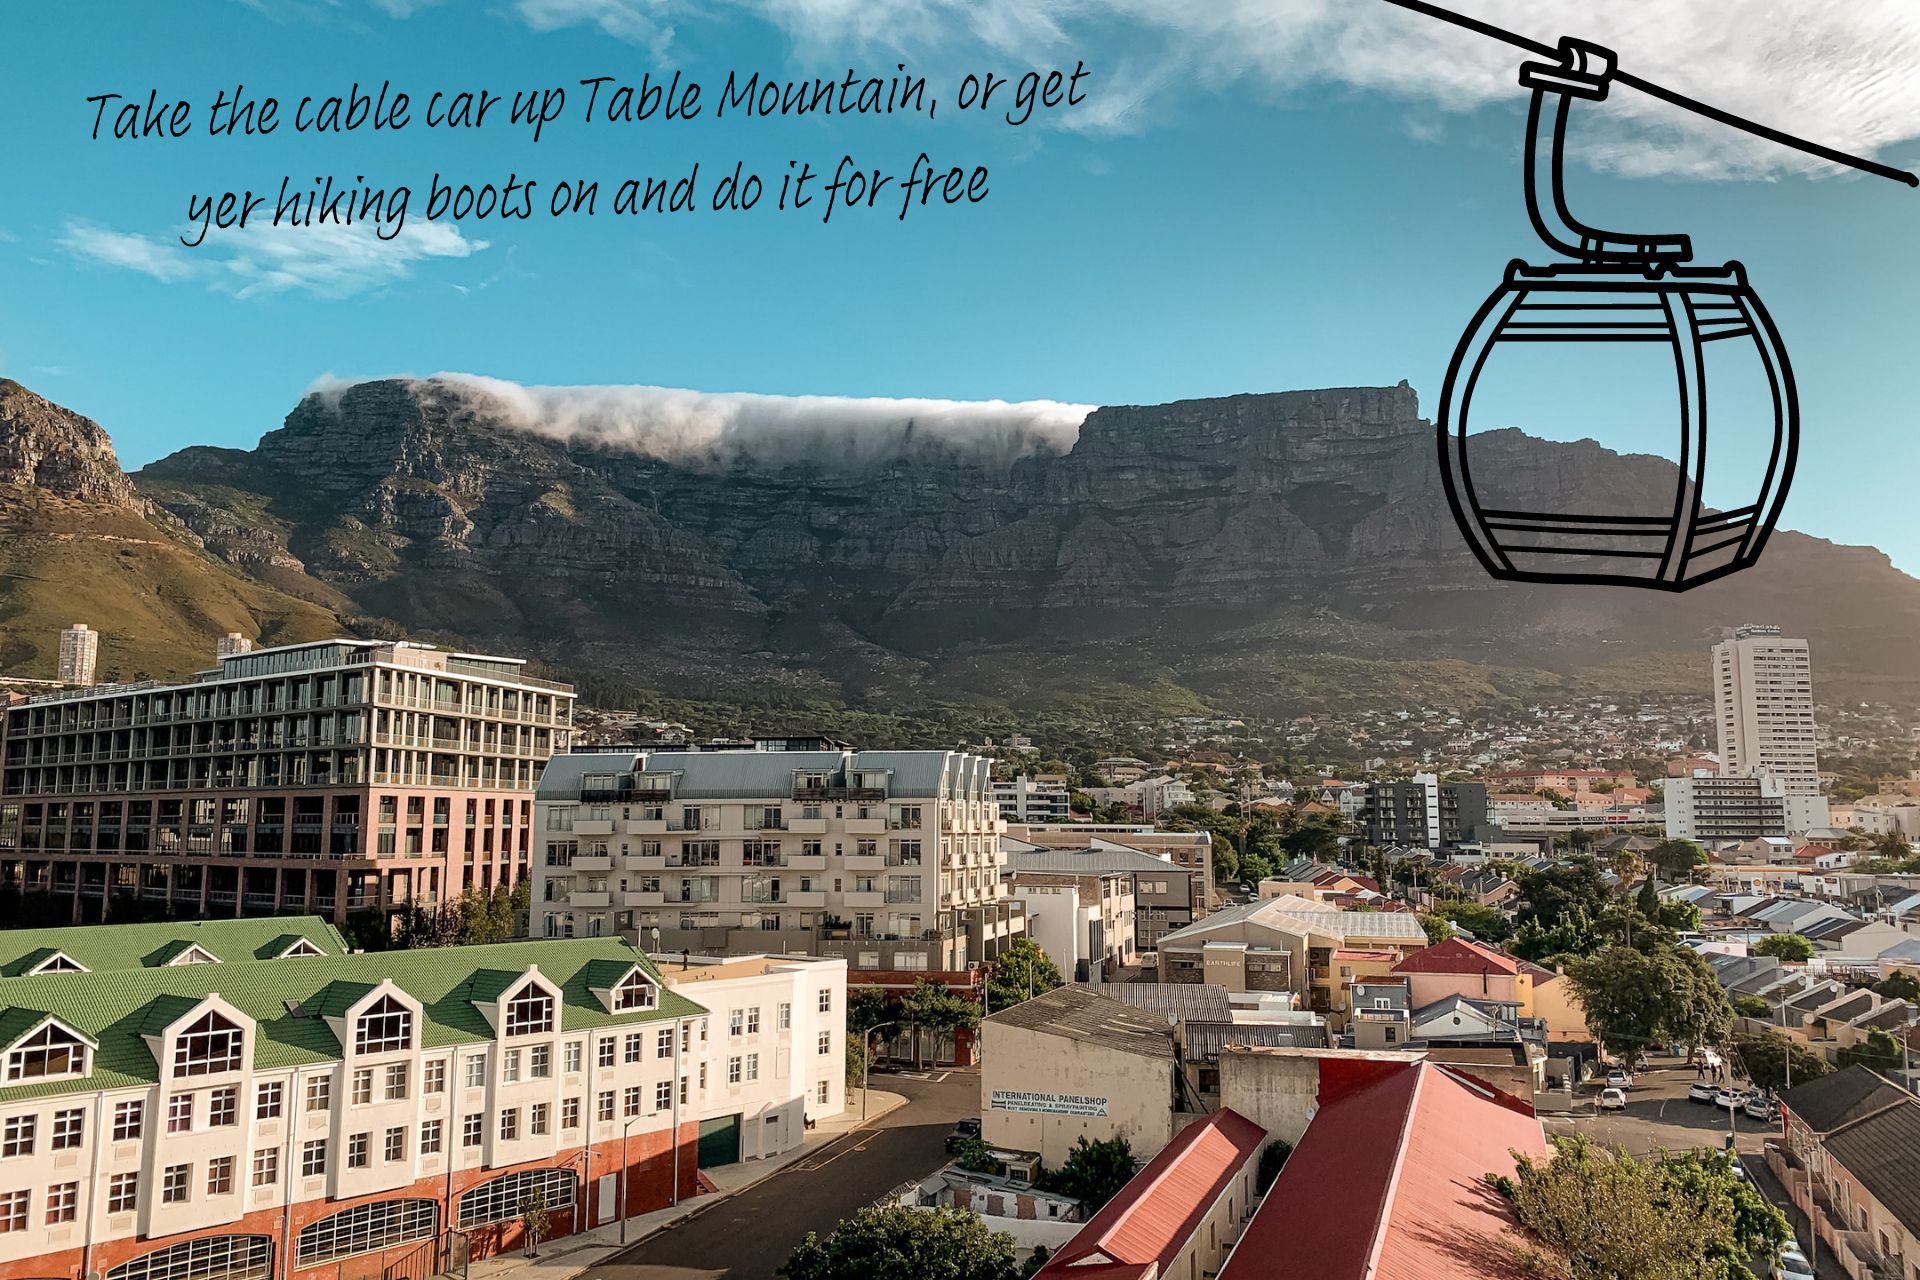 The city of Cape Town, with Table Mountain looming in the background.